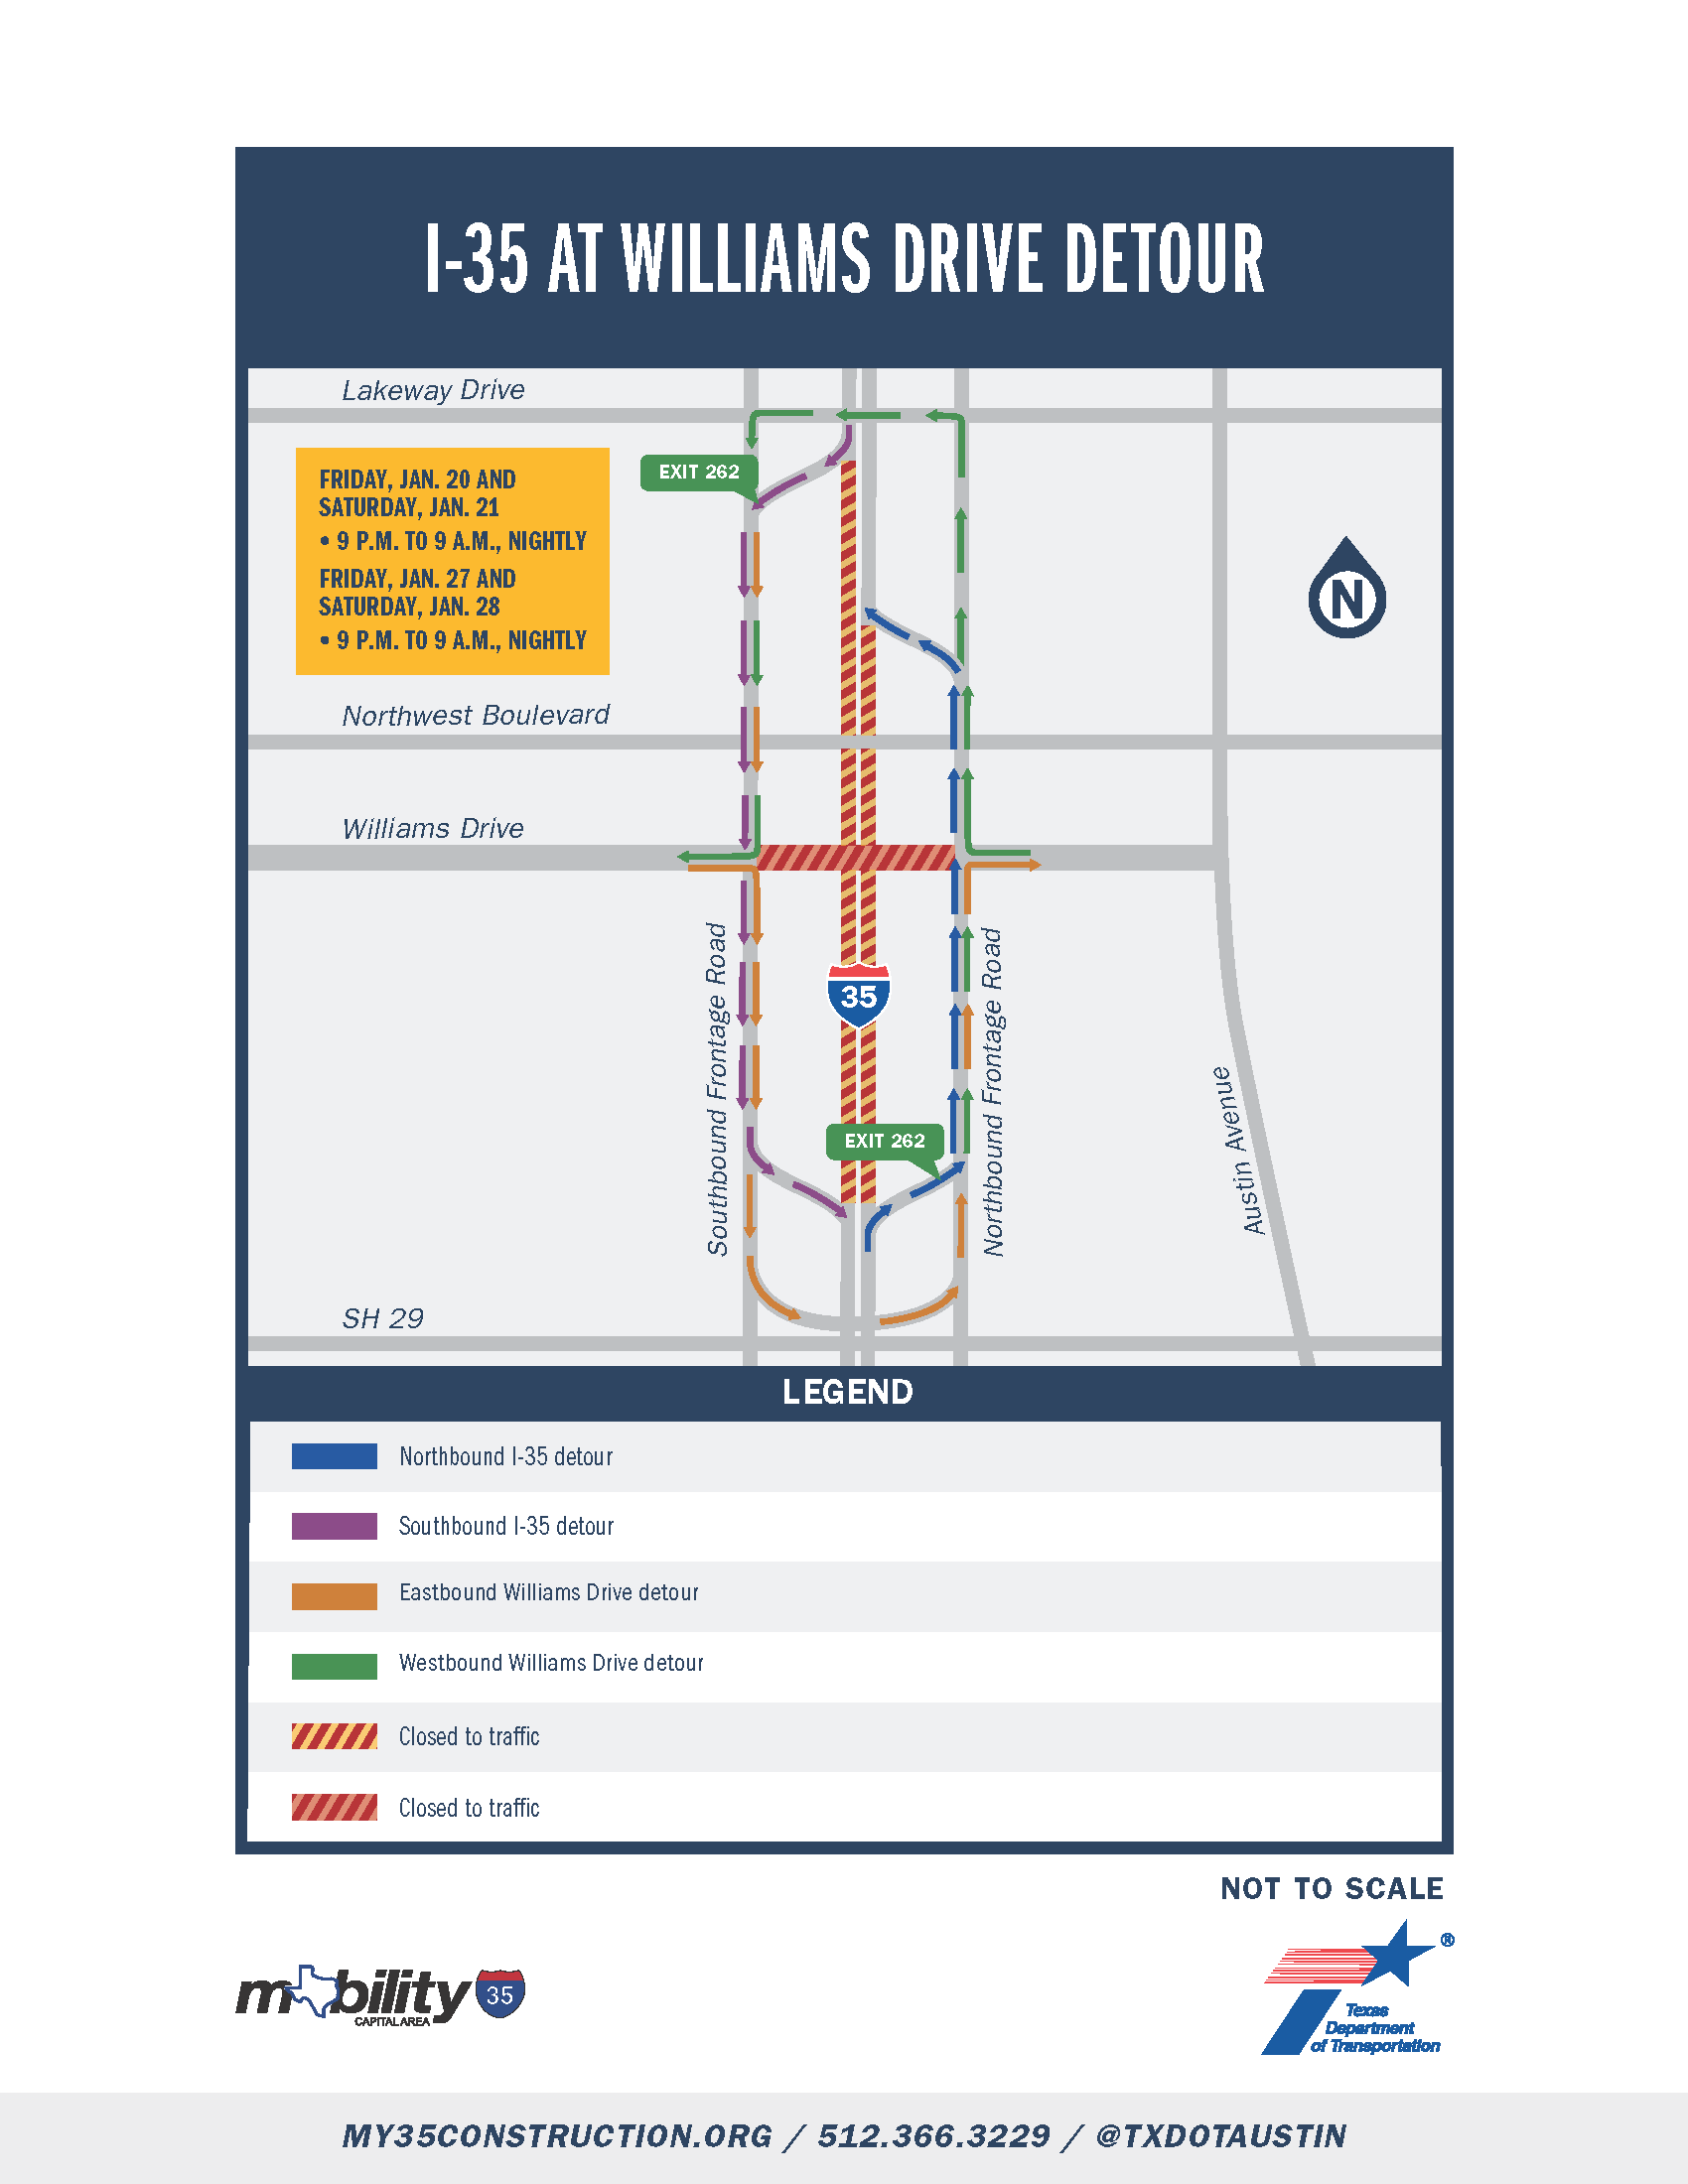 Graphic showing closure at Williams Drive and detour on I-35 access roads. I-35 traffic will be directed to the frontage road as the mainlanes are closed overnight on Jan. 20, Jan. 21, Jan. 27, and Jan. 28. 